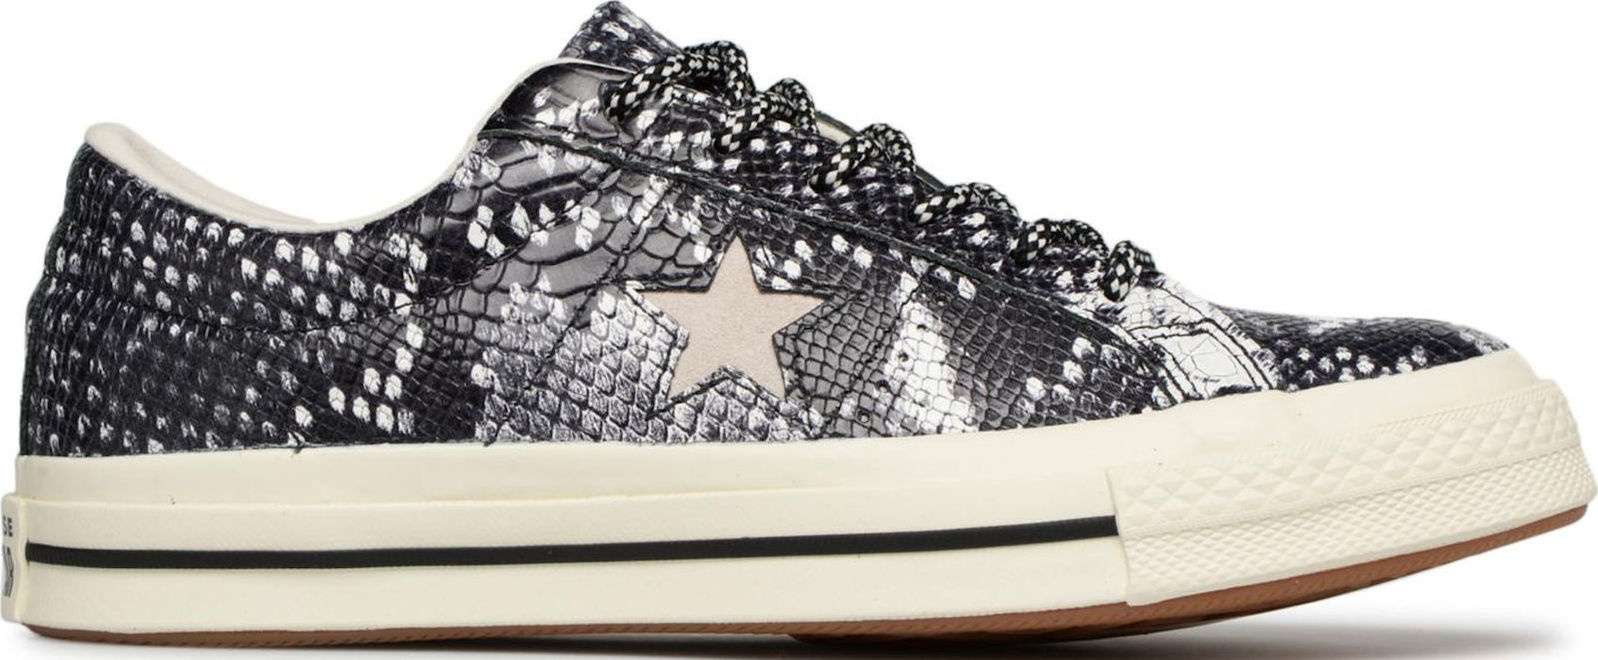 converse one star leather ox